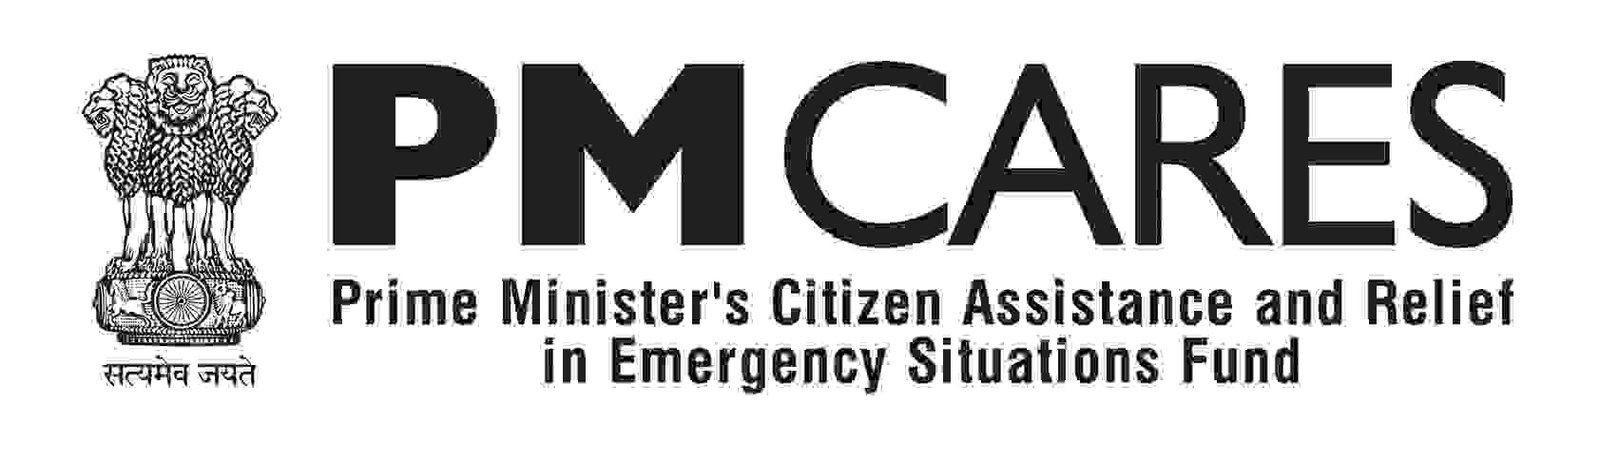 Prime Minister's Citizen Assistance and Relief in Emergency Situations Fund (PM CARES Fund)